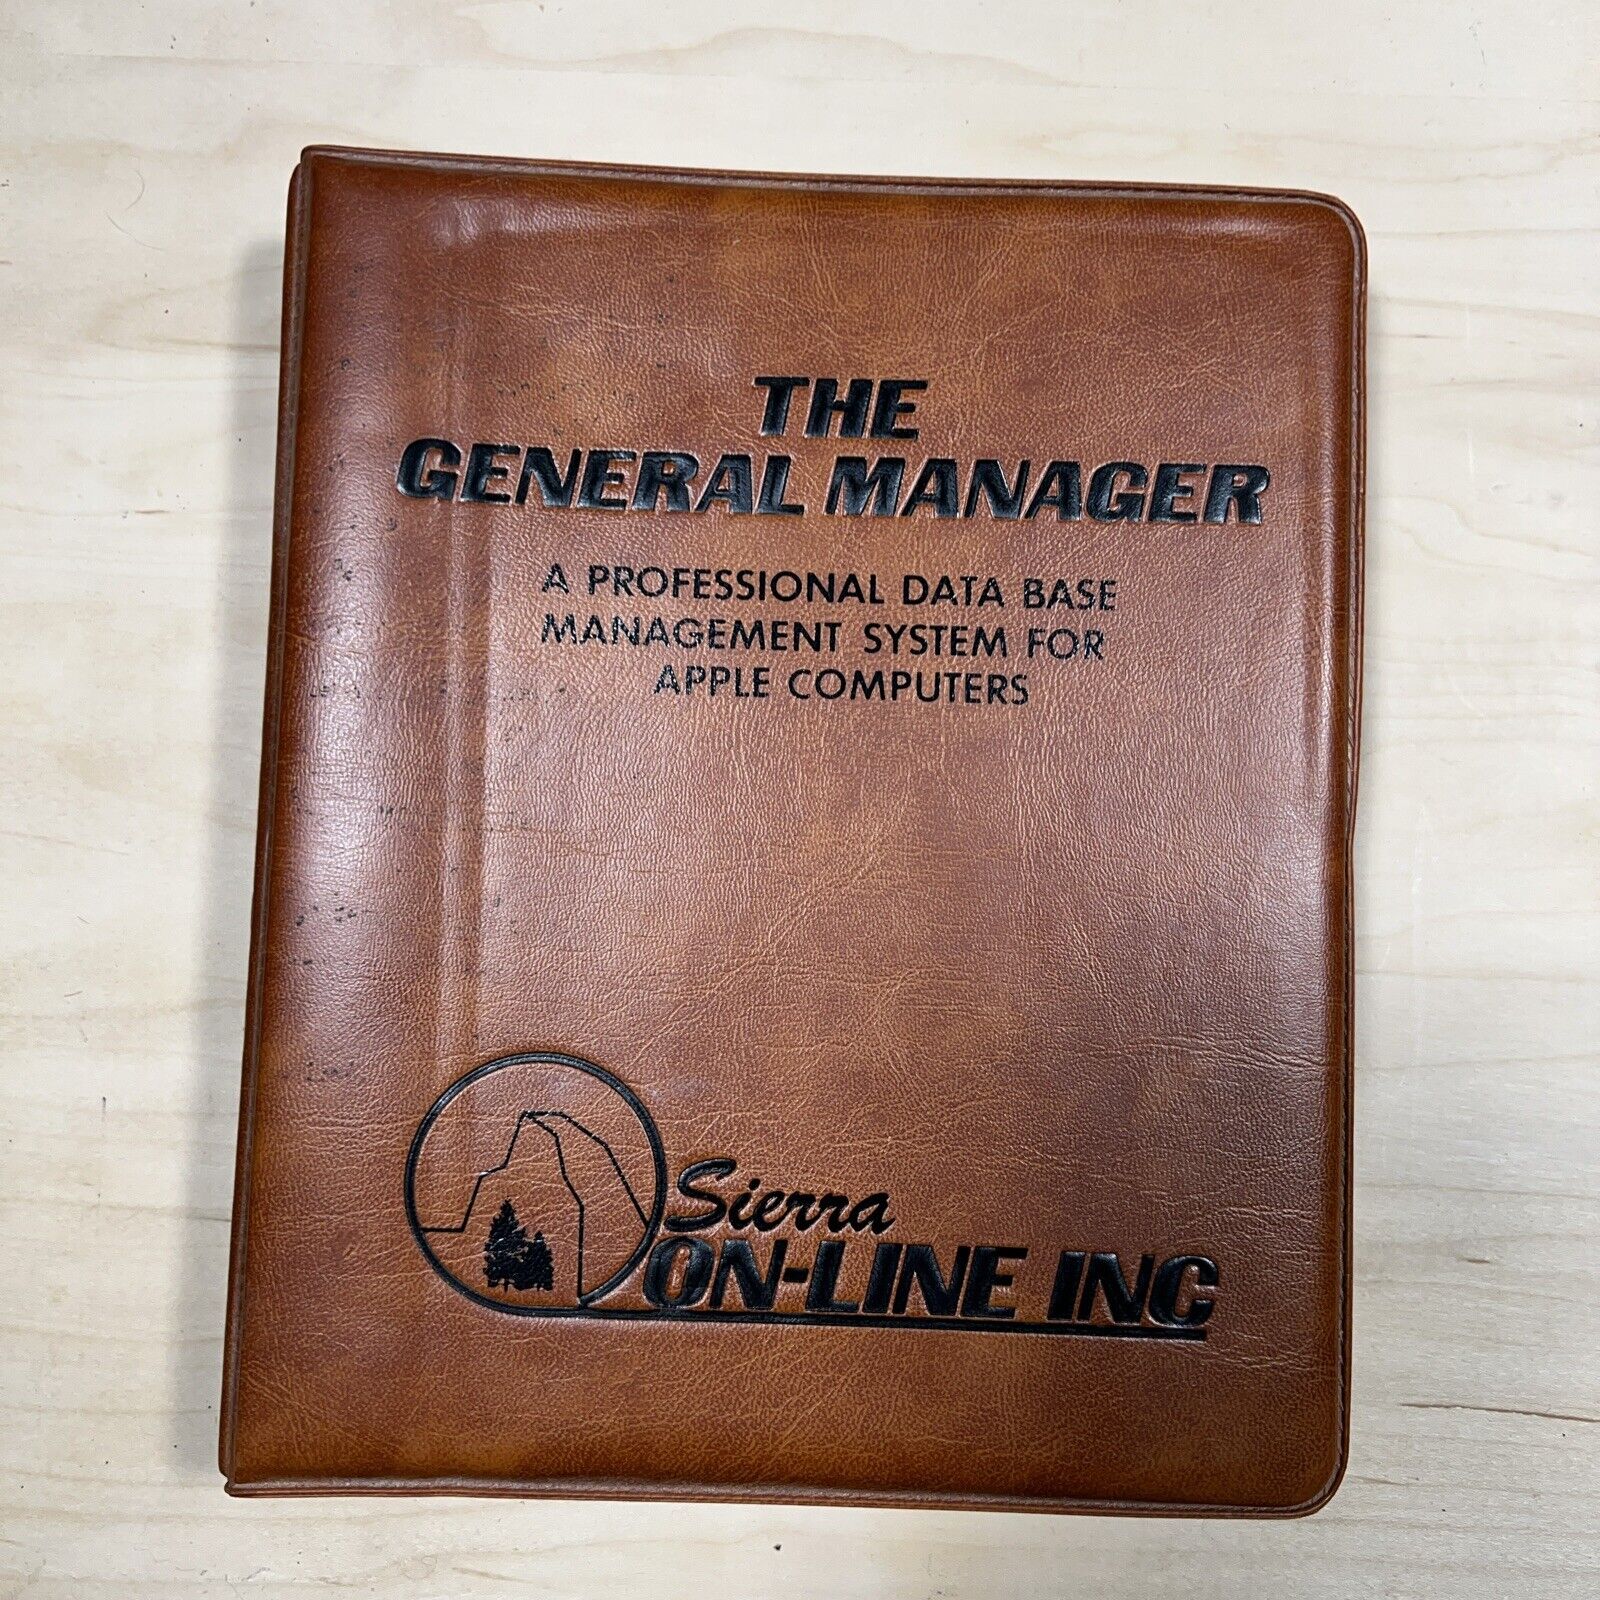 *NATIVE WORKING* Rare Apple II General Manager DBMS (1981, Sierra)